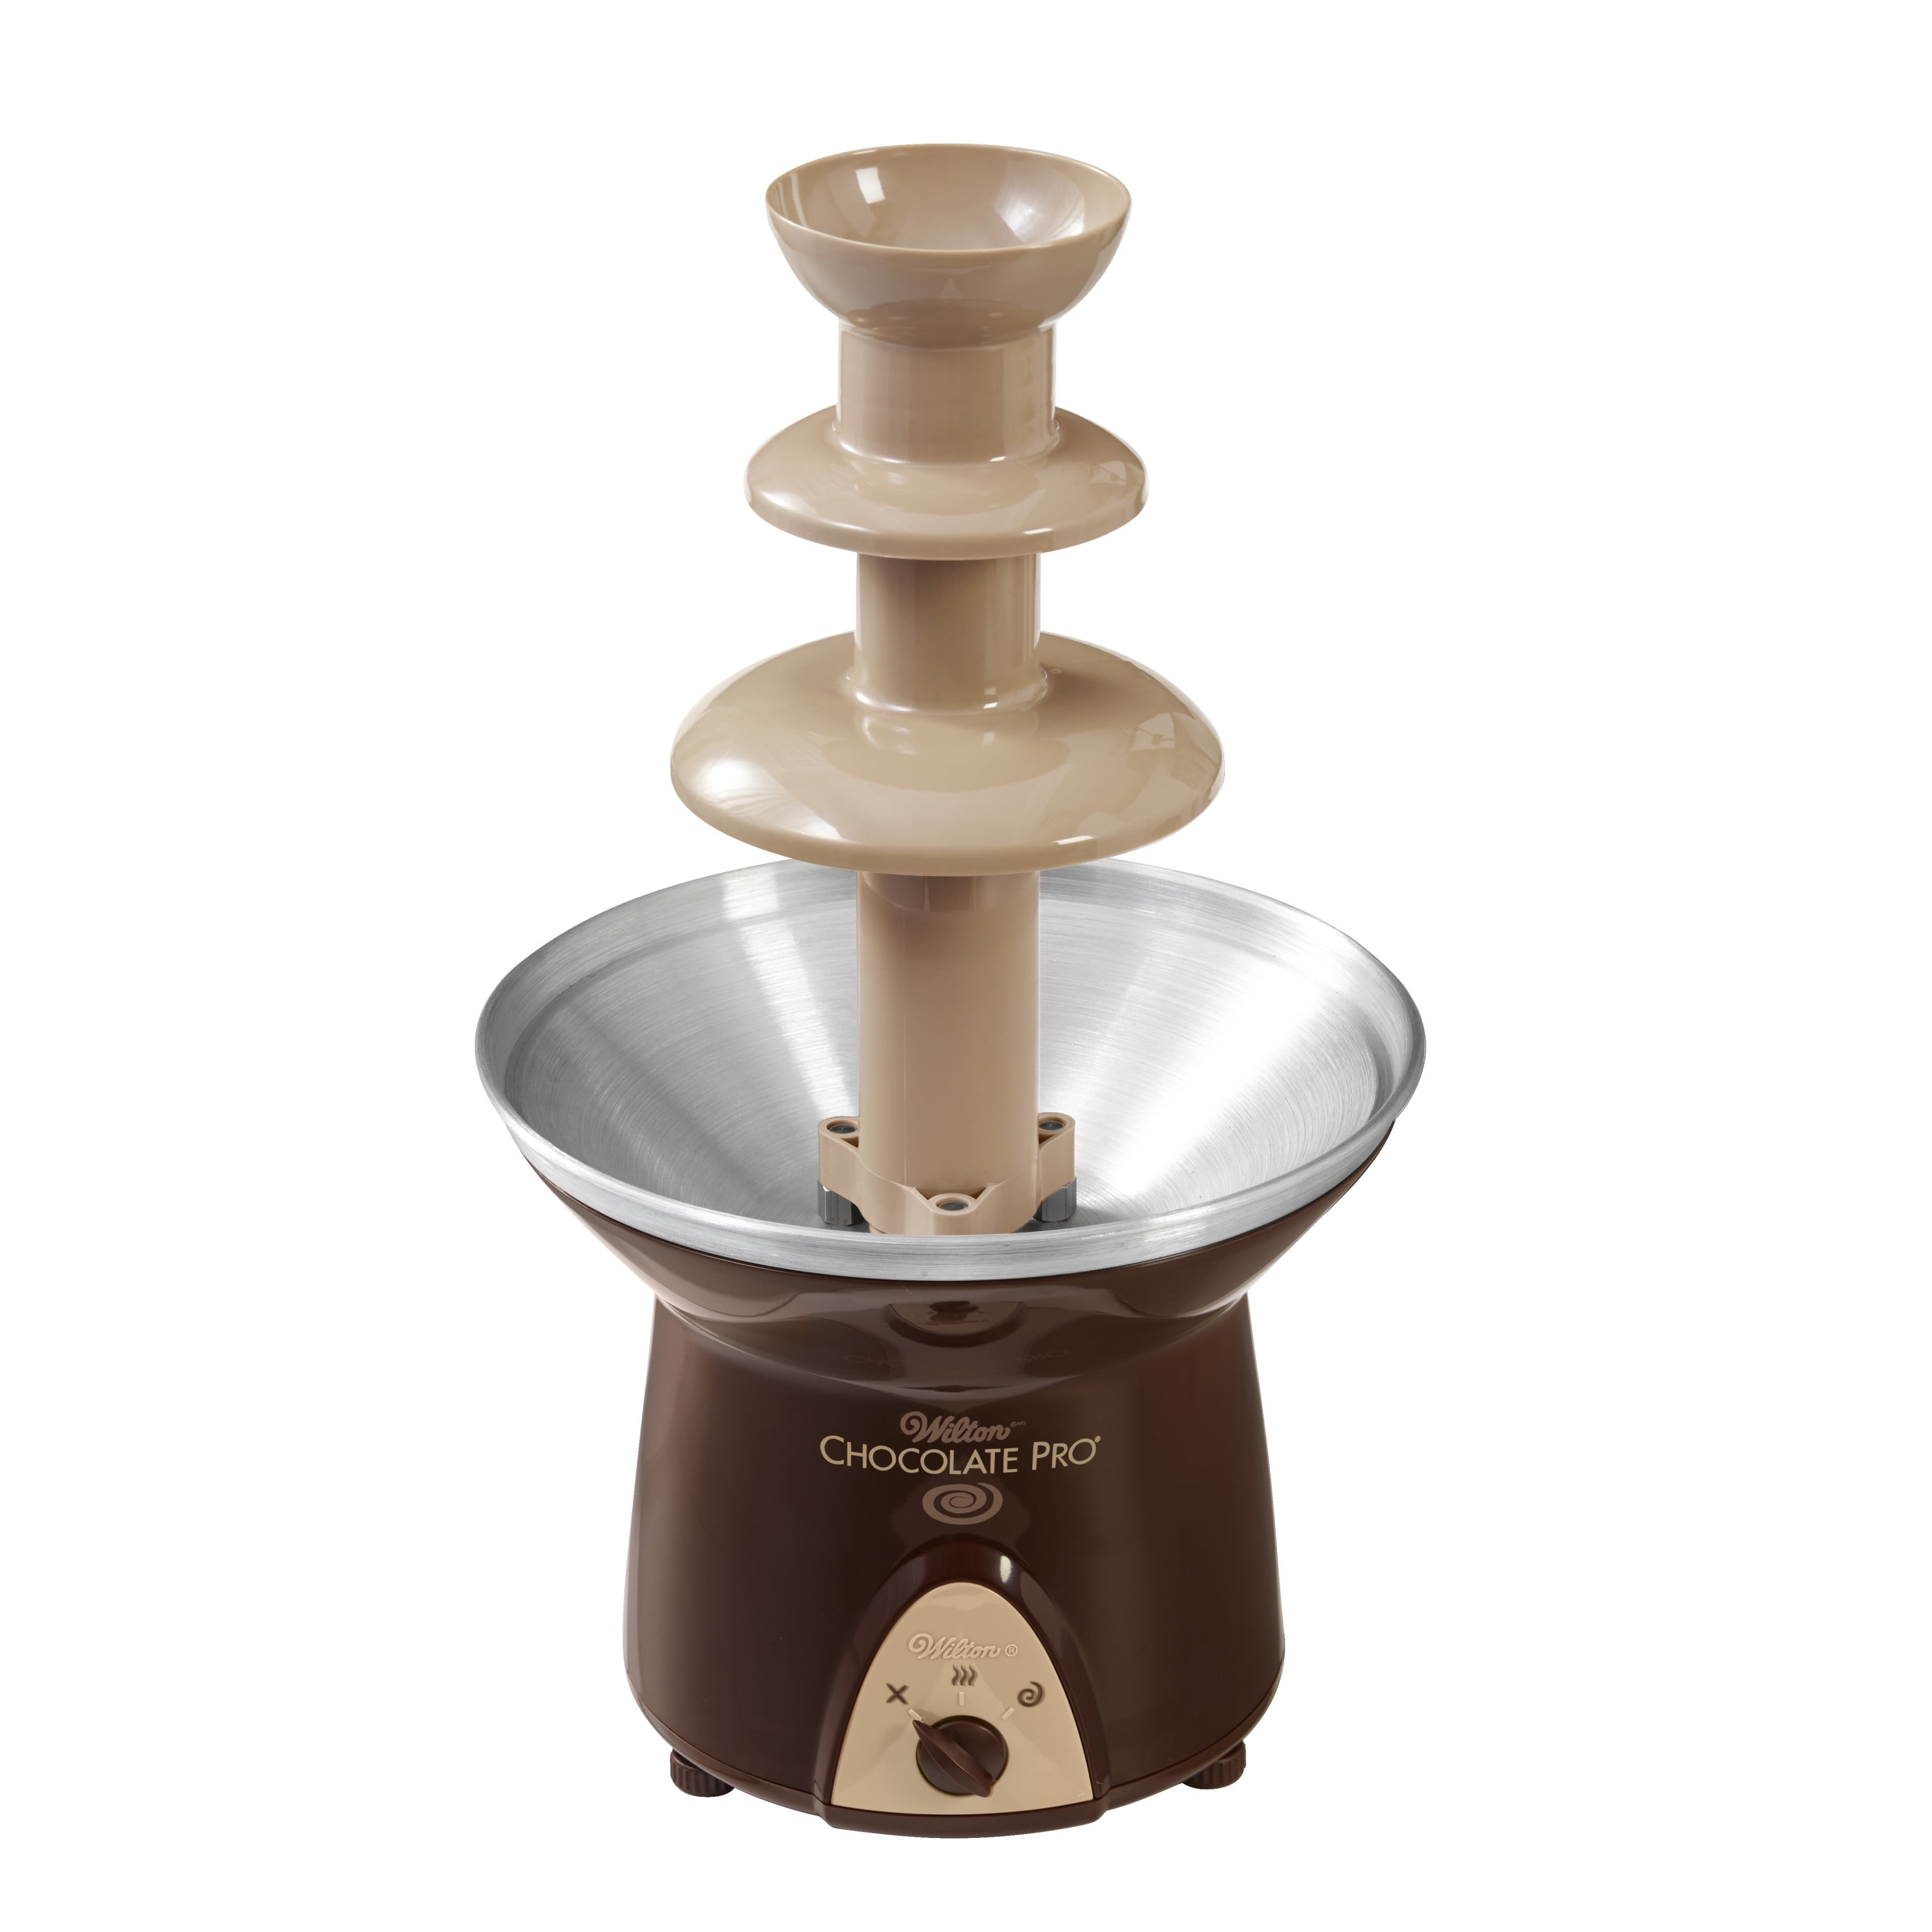 Details about   New Stainless Steel Mini Chocolate Fondue Fountain For Dipping Great Gift Free 